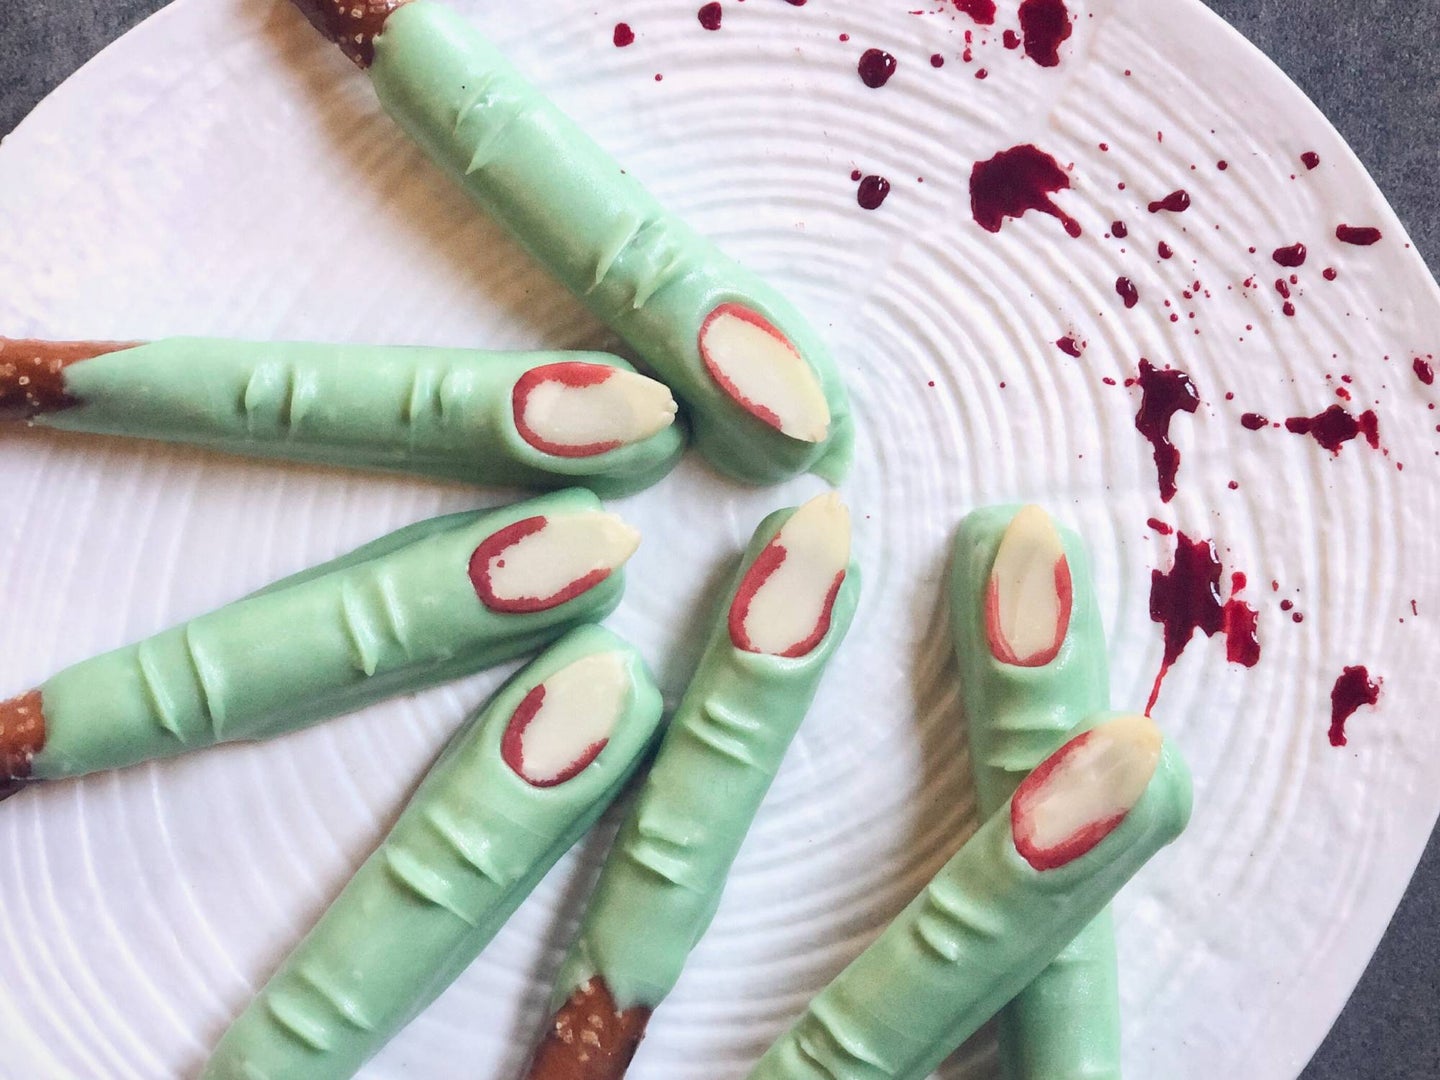 Witch fingers